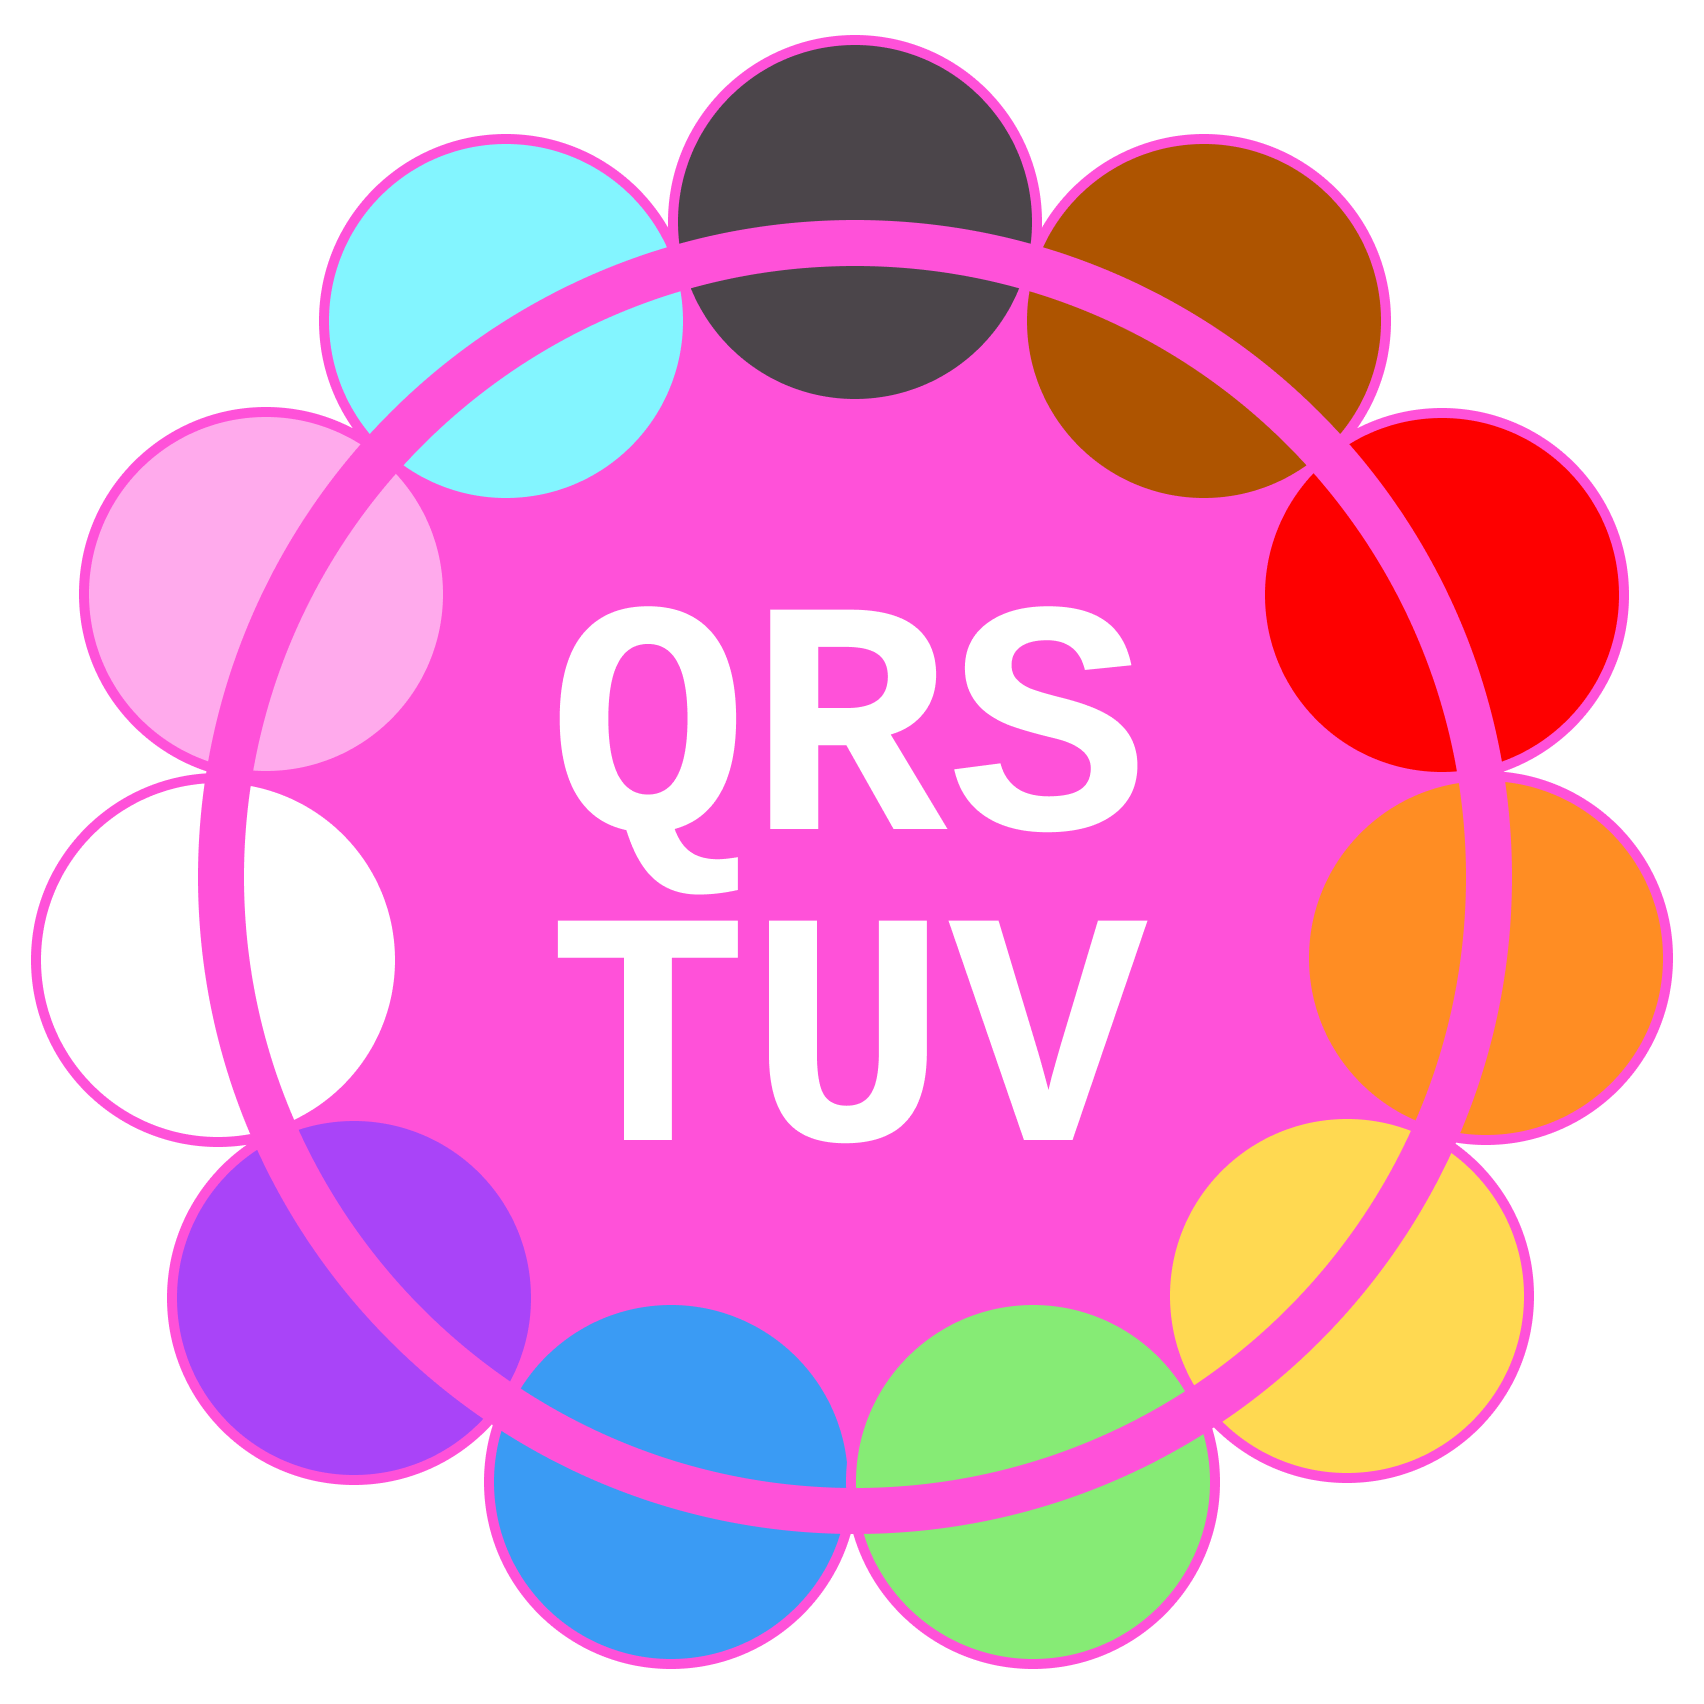 Flower-shaped logo with the 11 Progress Flag colours of inclusive Pride and the text QRS TUV in the middle.